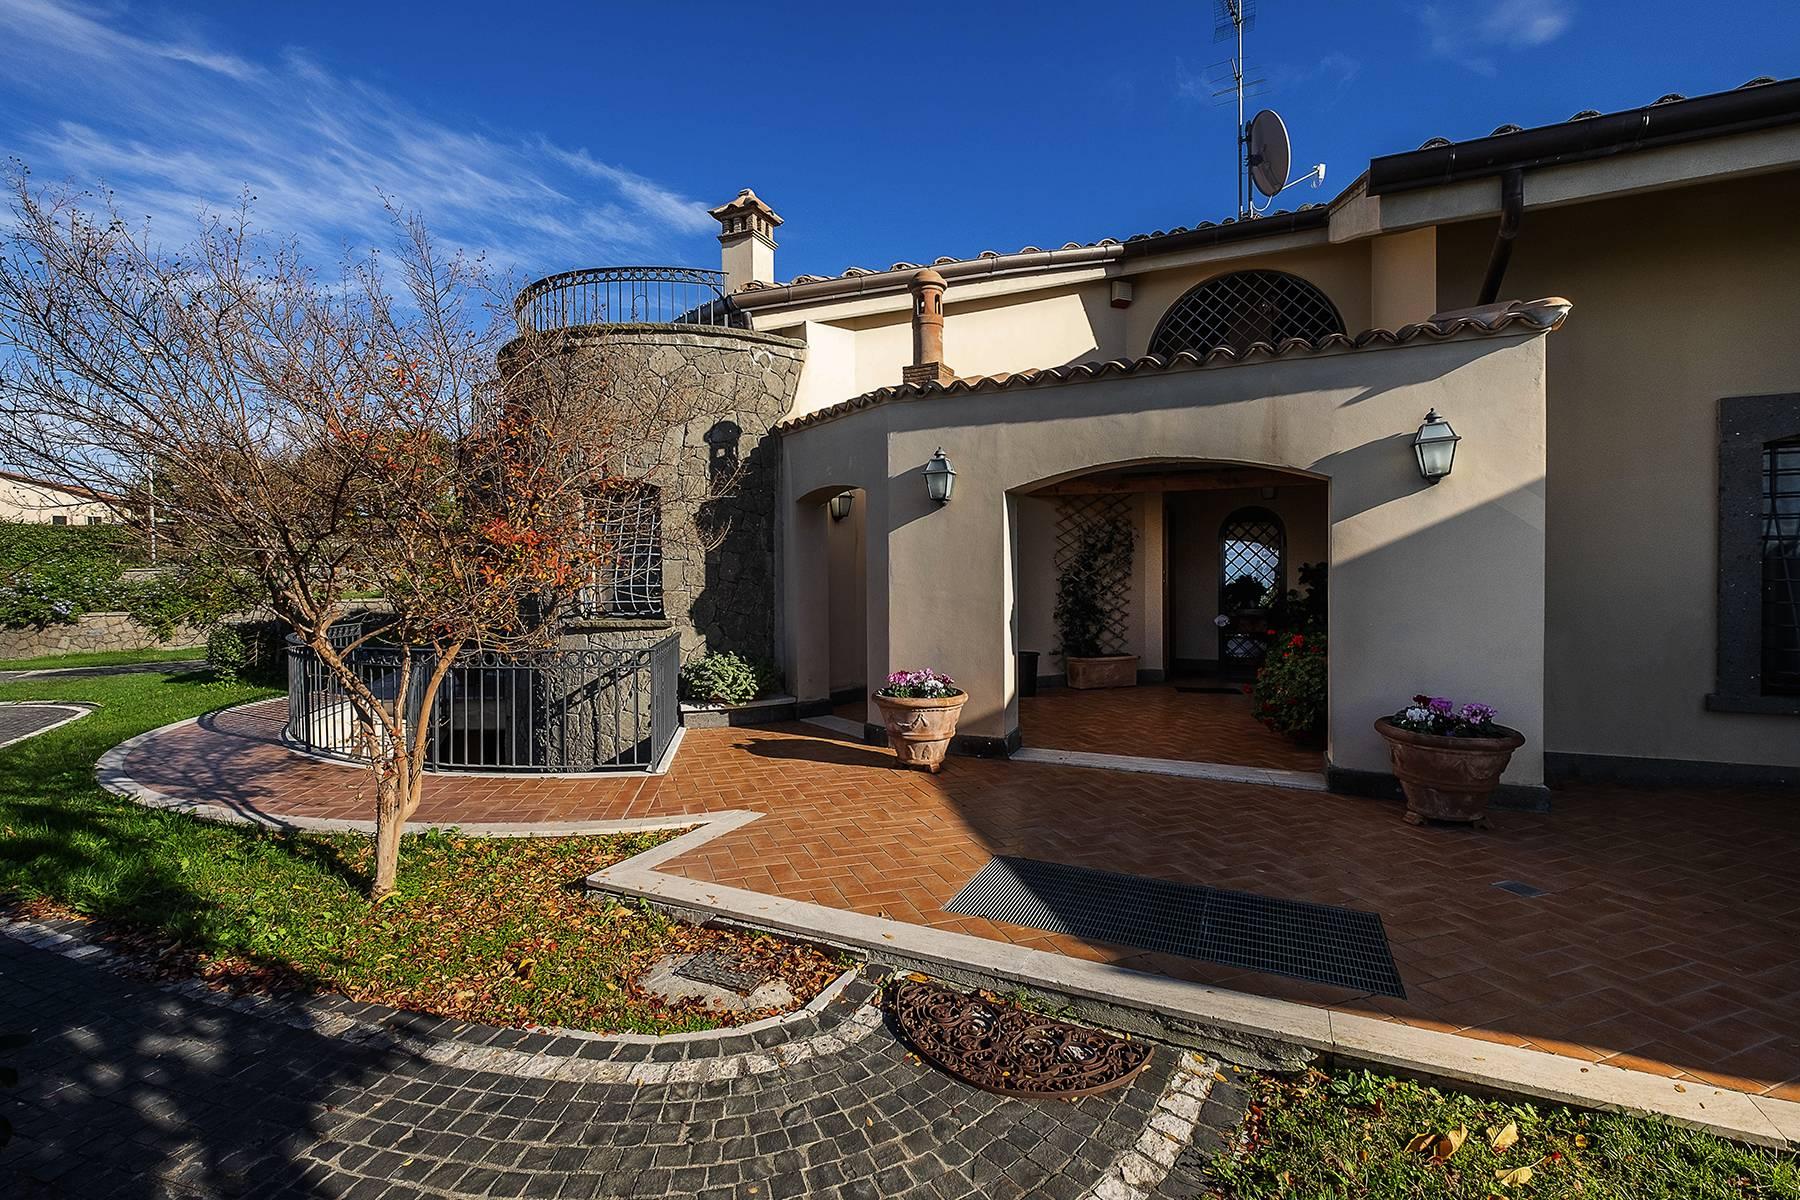 Villa in Frascati with a stunning view of the Eternal City - 1